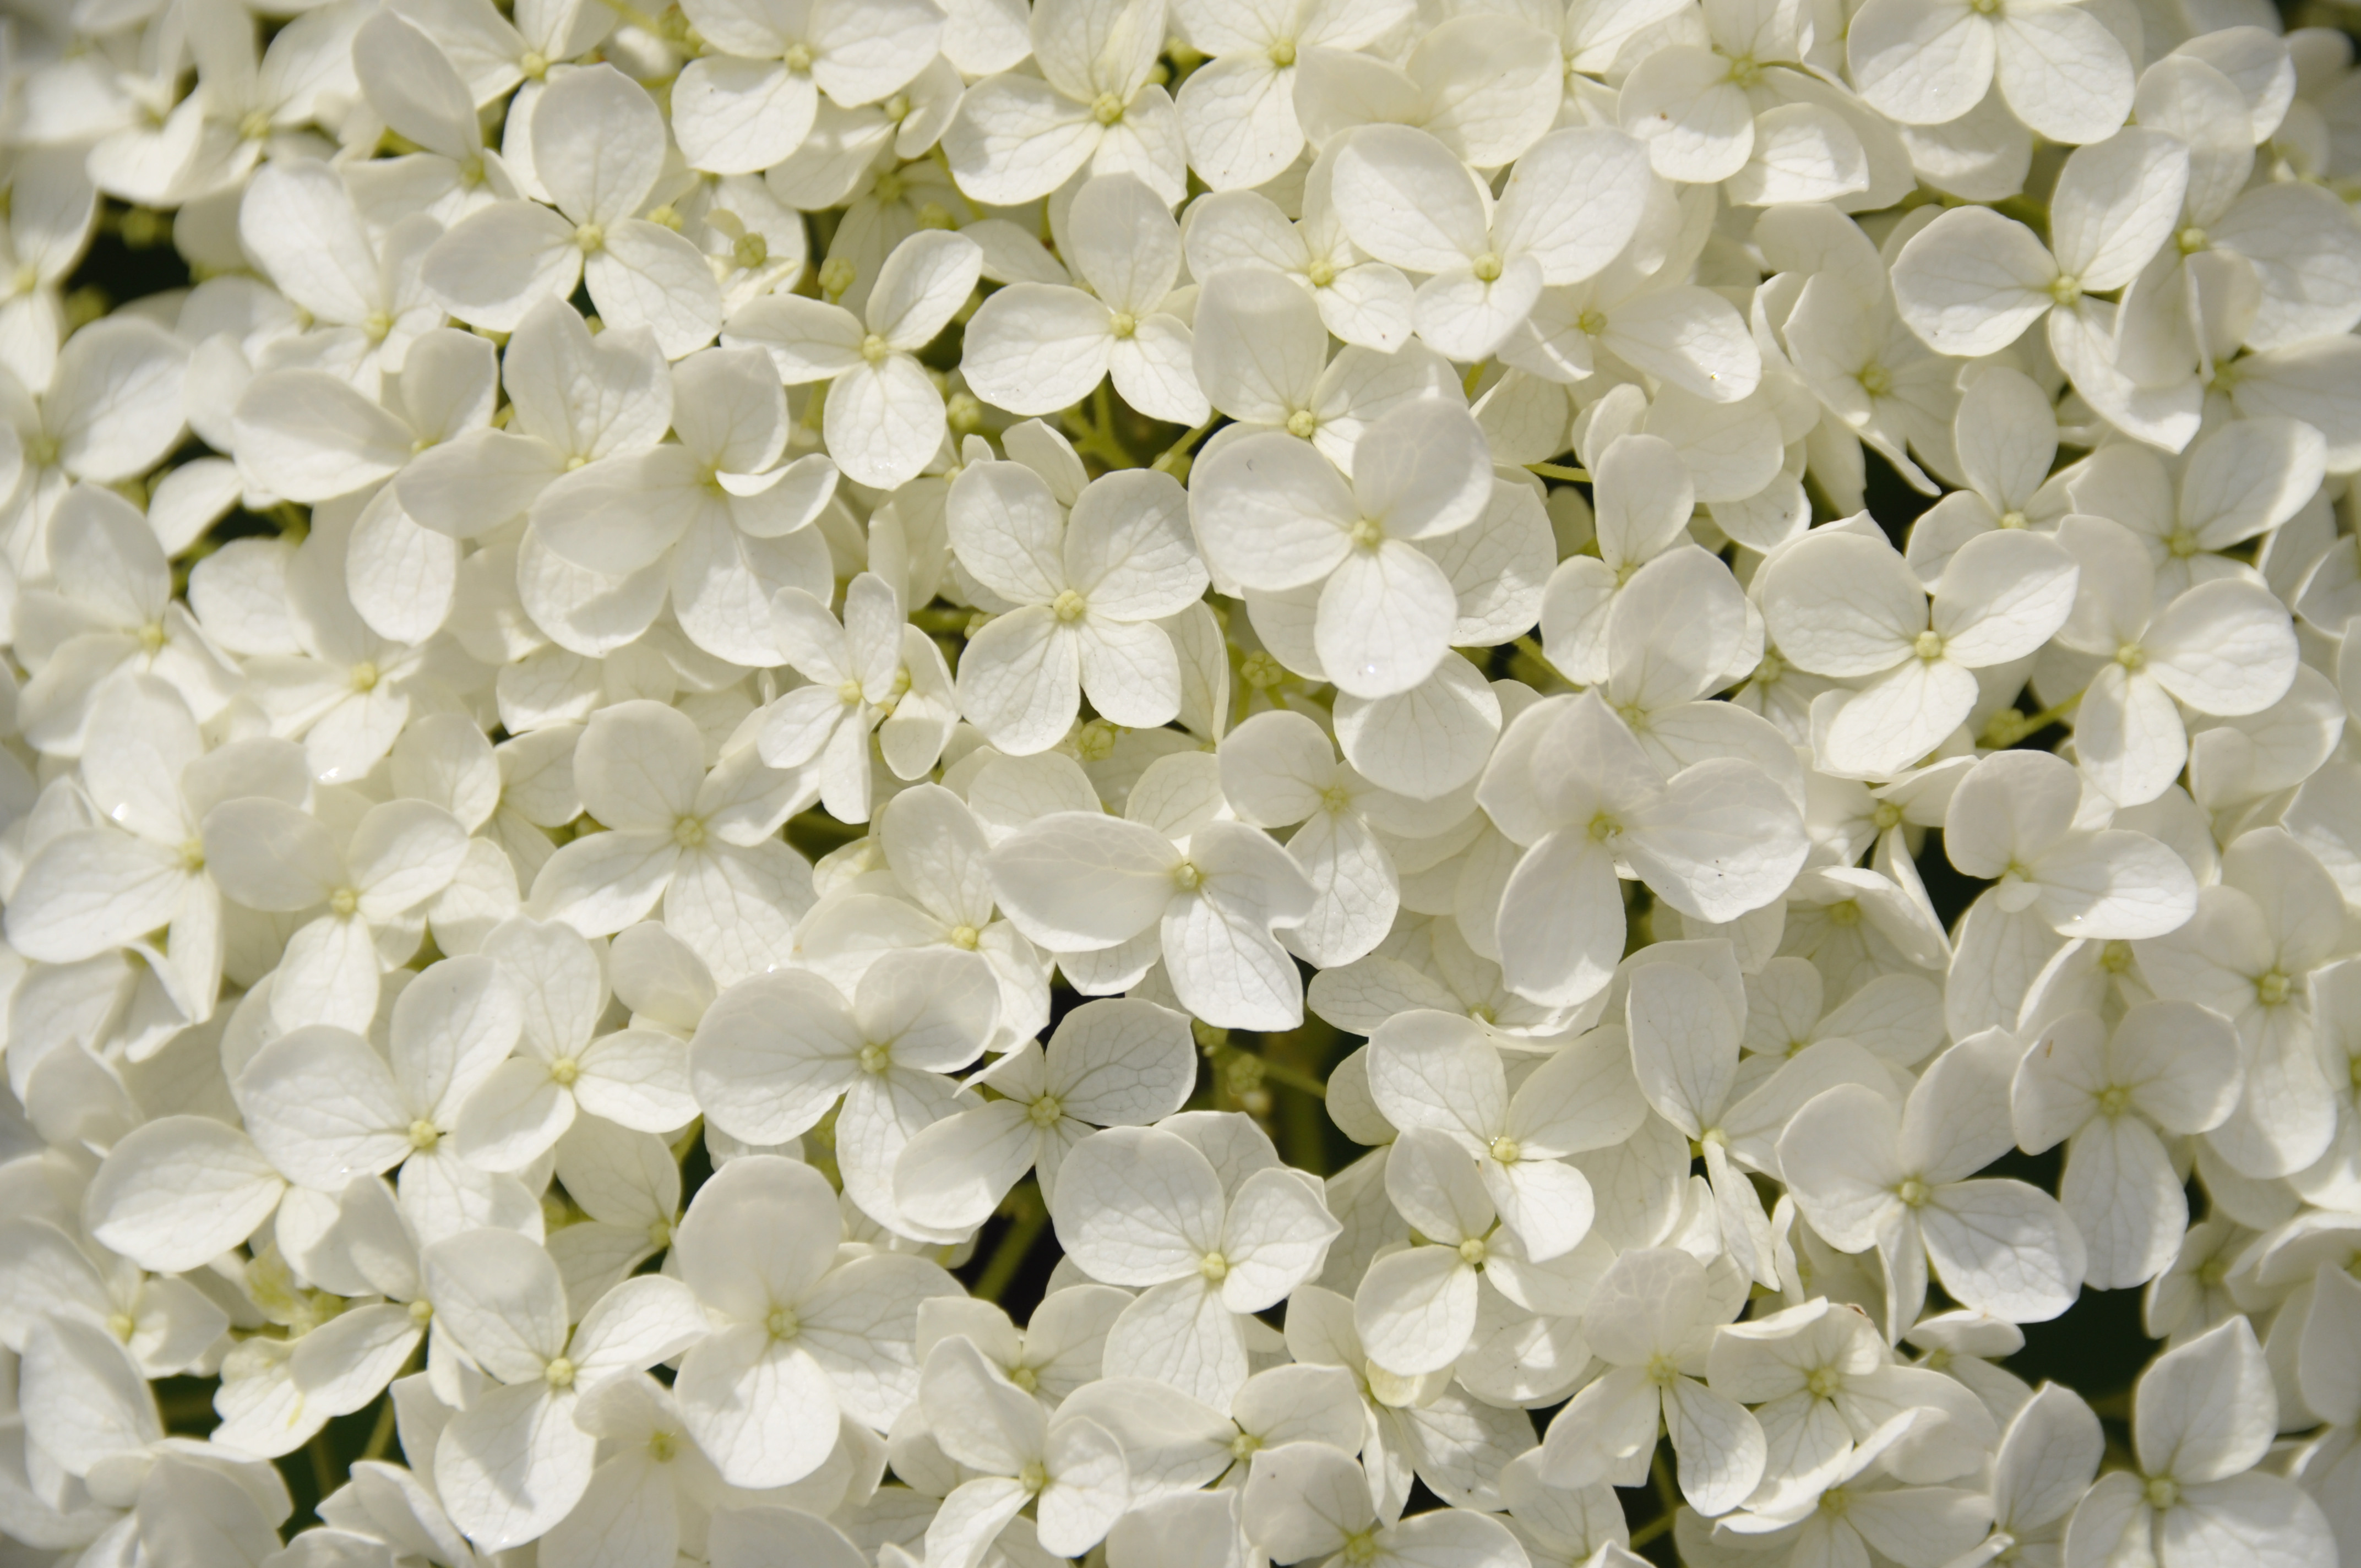 White Flowers Google Search Pinterest Lively Images | transitionsfv